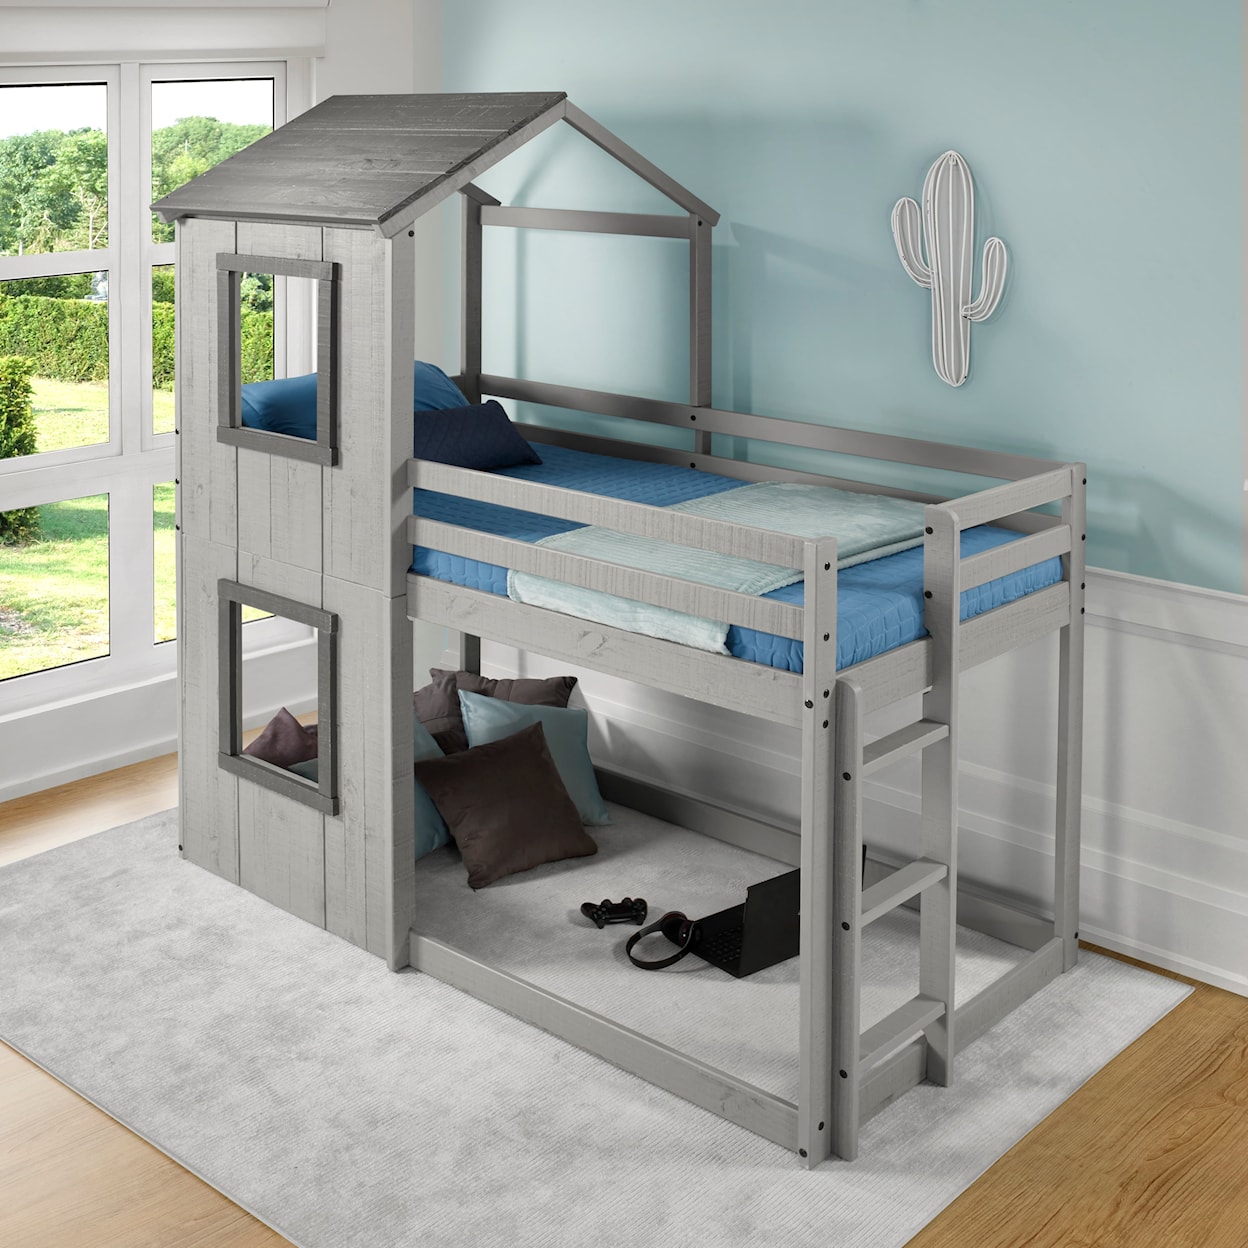 Canal House House Bunk Beds and Low Bunks Promo House Bunk Bed